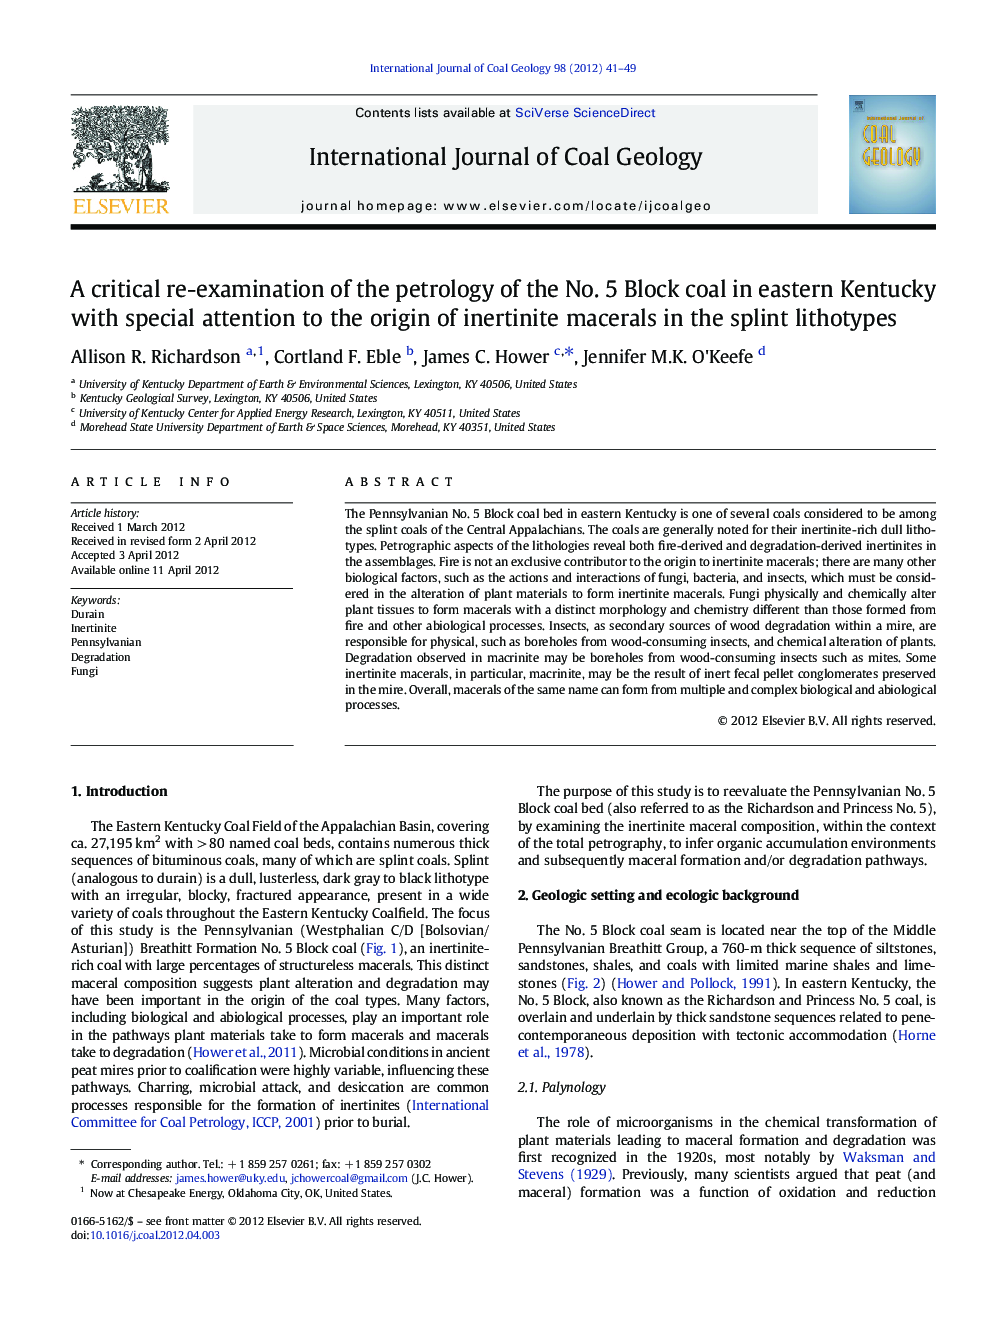 A critical re-examination of the petrology of the No. 5 Block coal in eastern Kentucky with special attention to the origin of inertinite macerals in the splint lithotypes